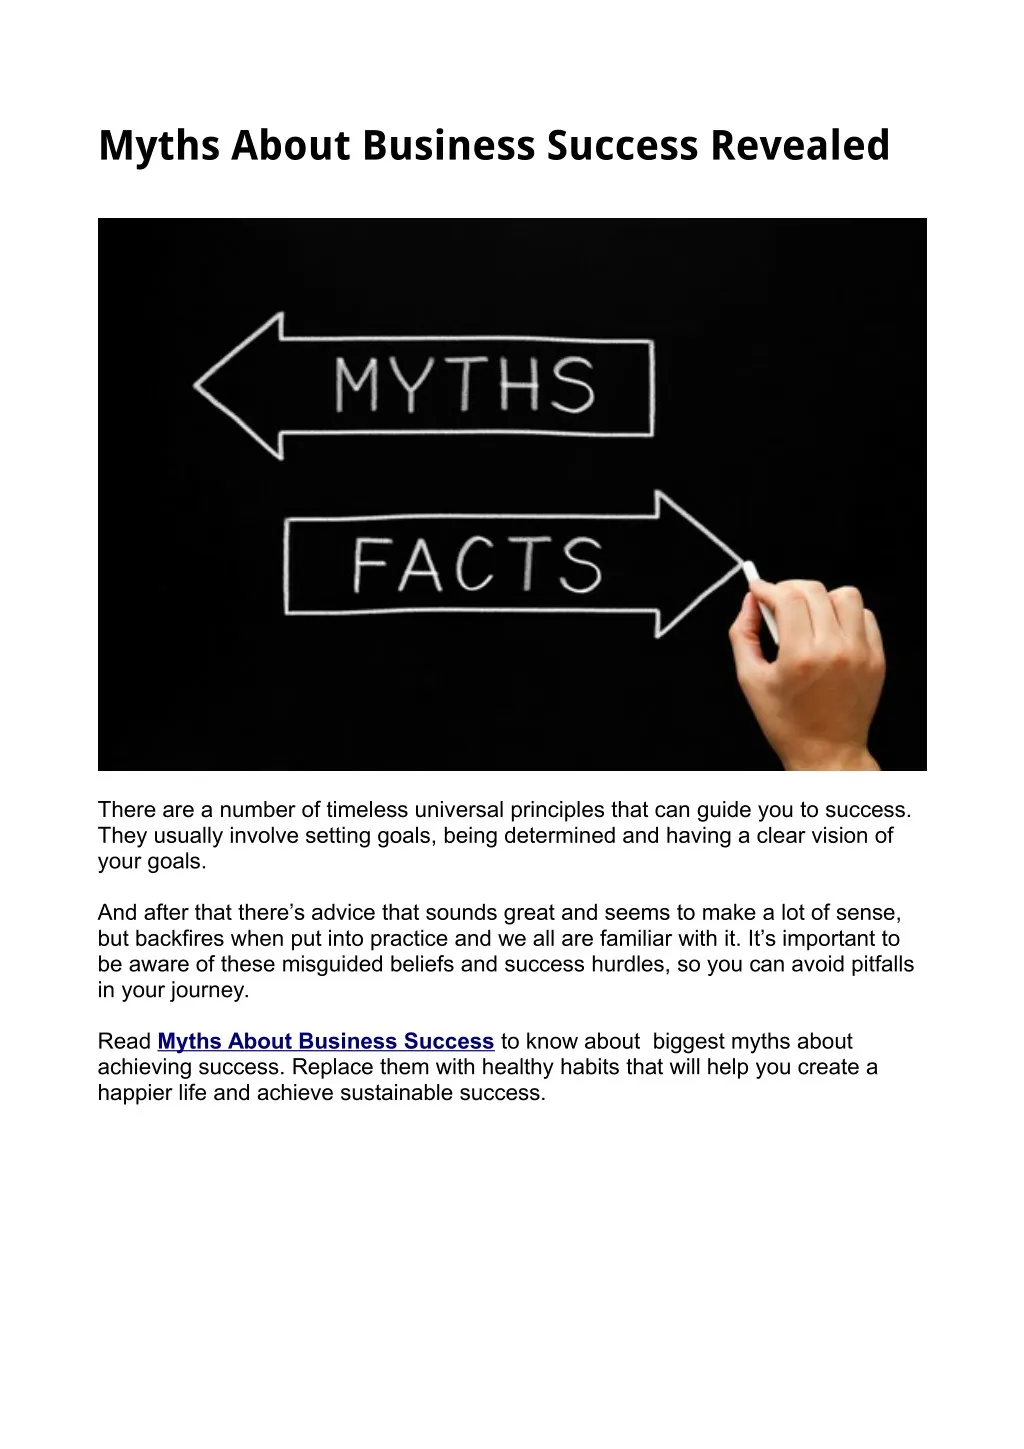 myths about business success revealed